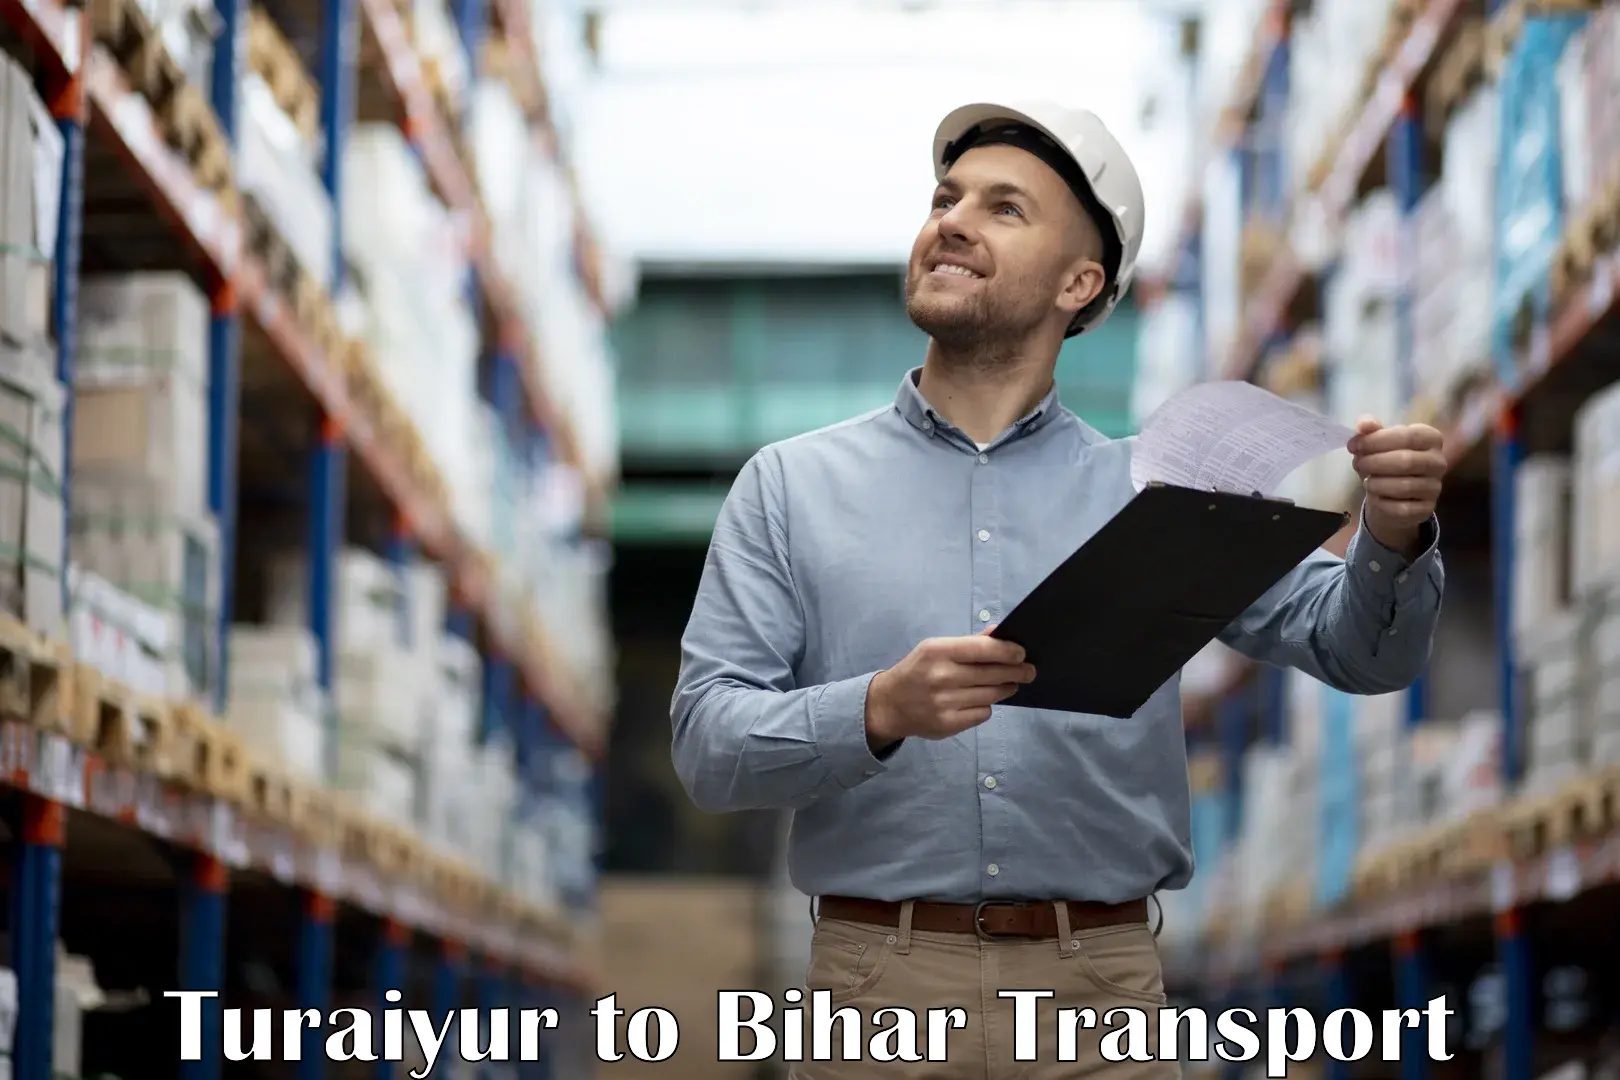 Goods delivery service Turaiyur to Chhapra